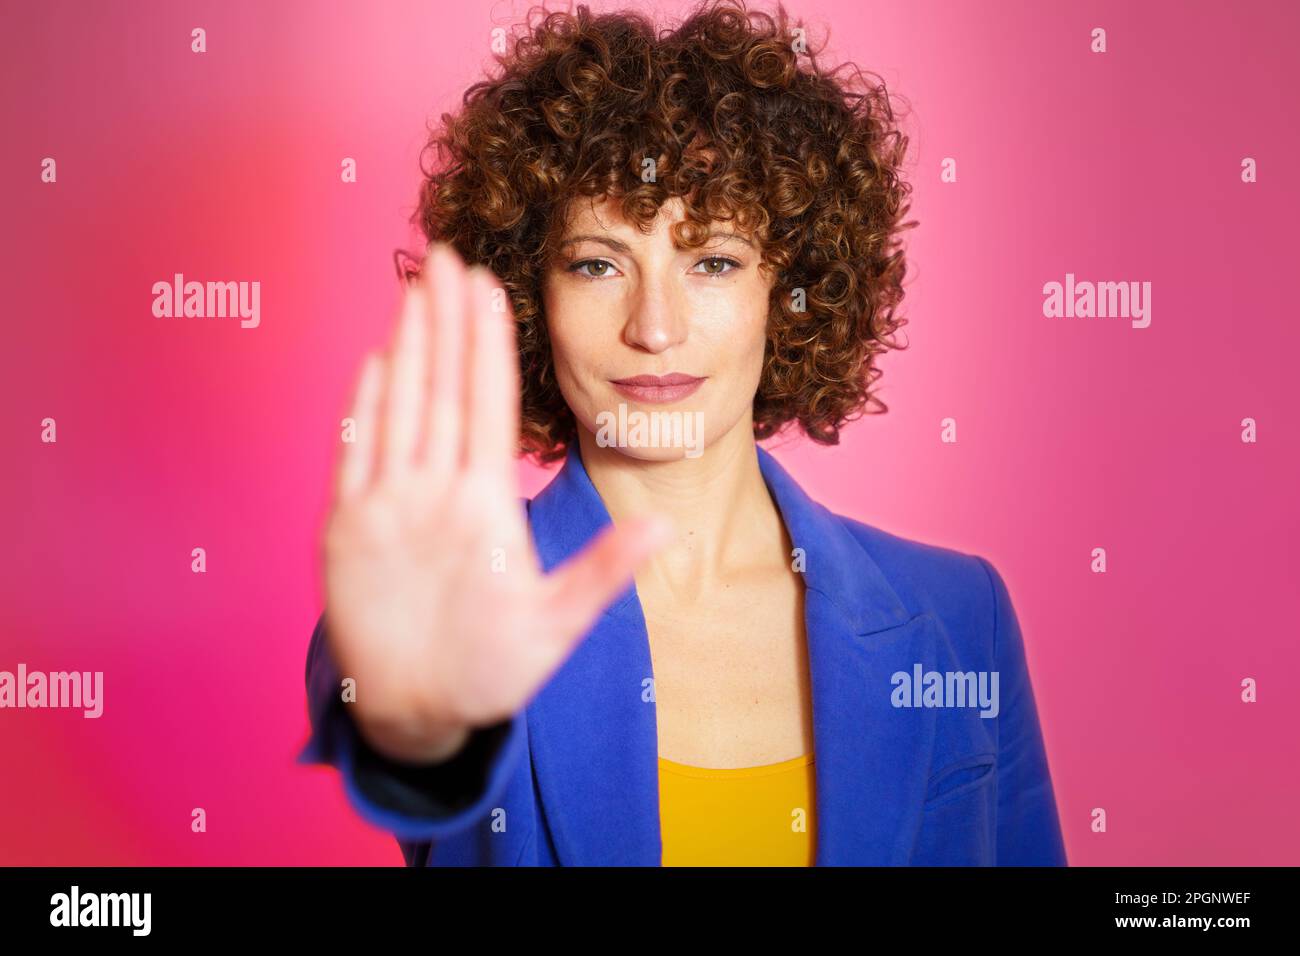 Woman stop gesturing against magenta background Stock Photo